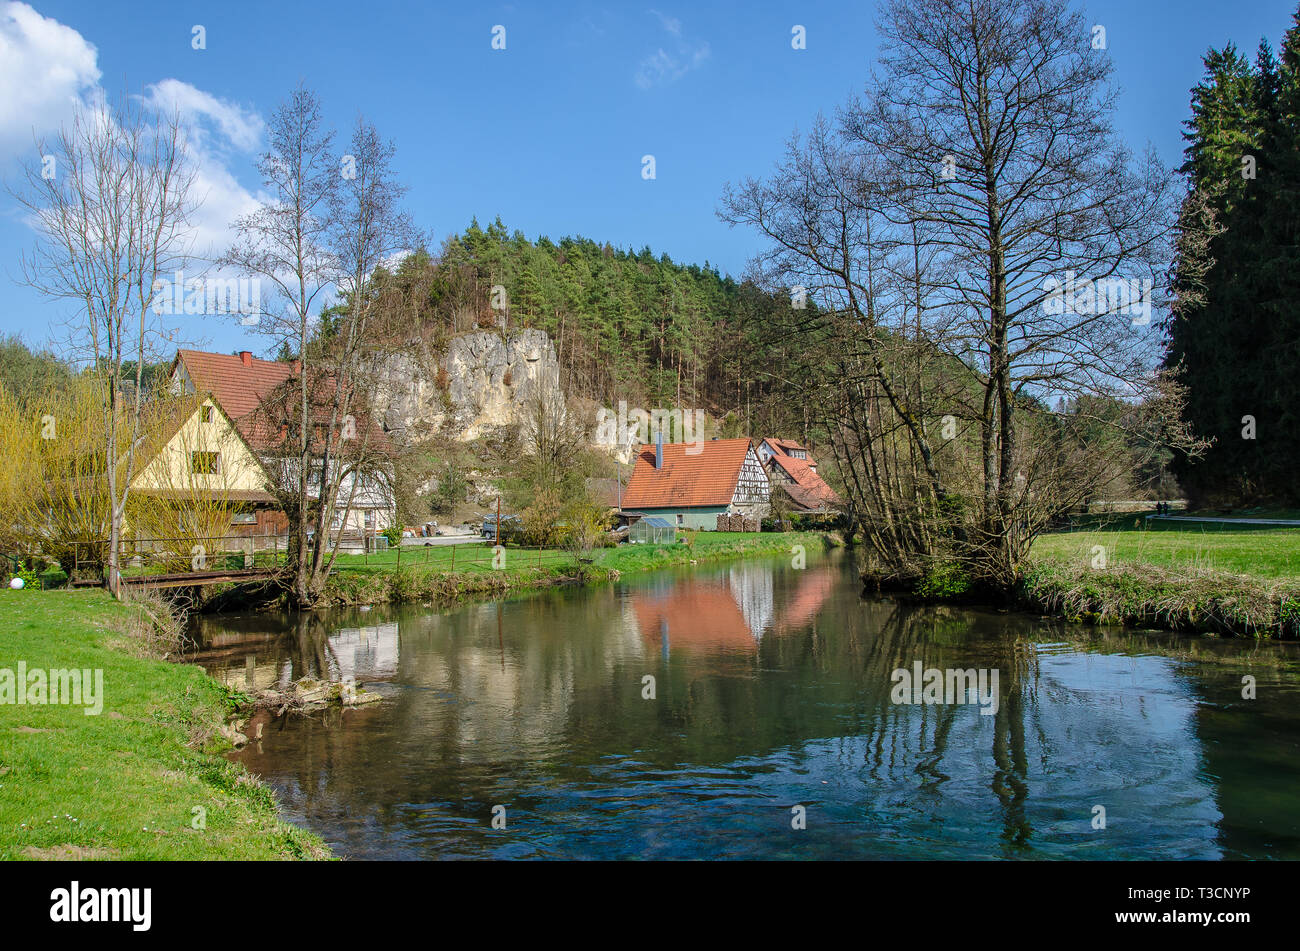 Franconian Switzerland is in Upper Franconia, a popular tourist retreat. Located between the River Pegnitz, the River Regnitz and the River Main. Stock Photo